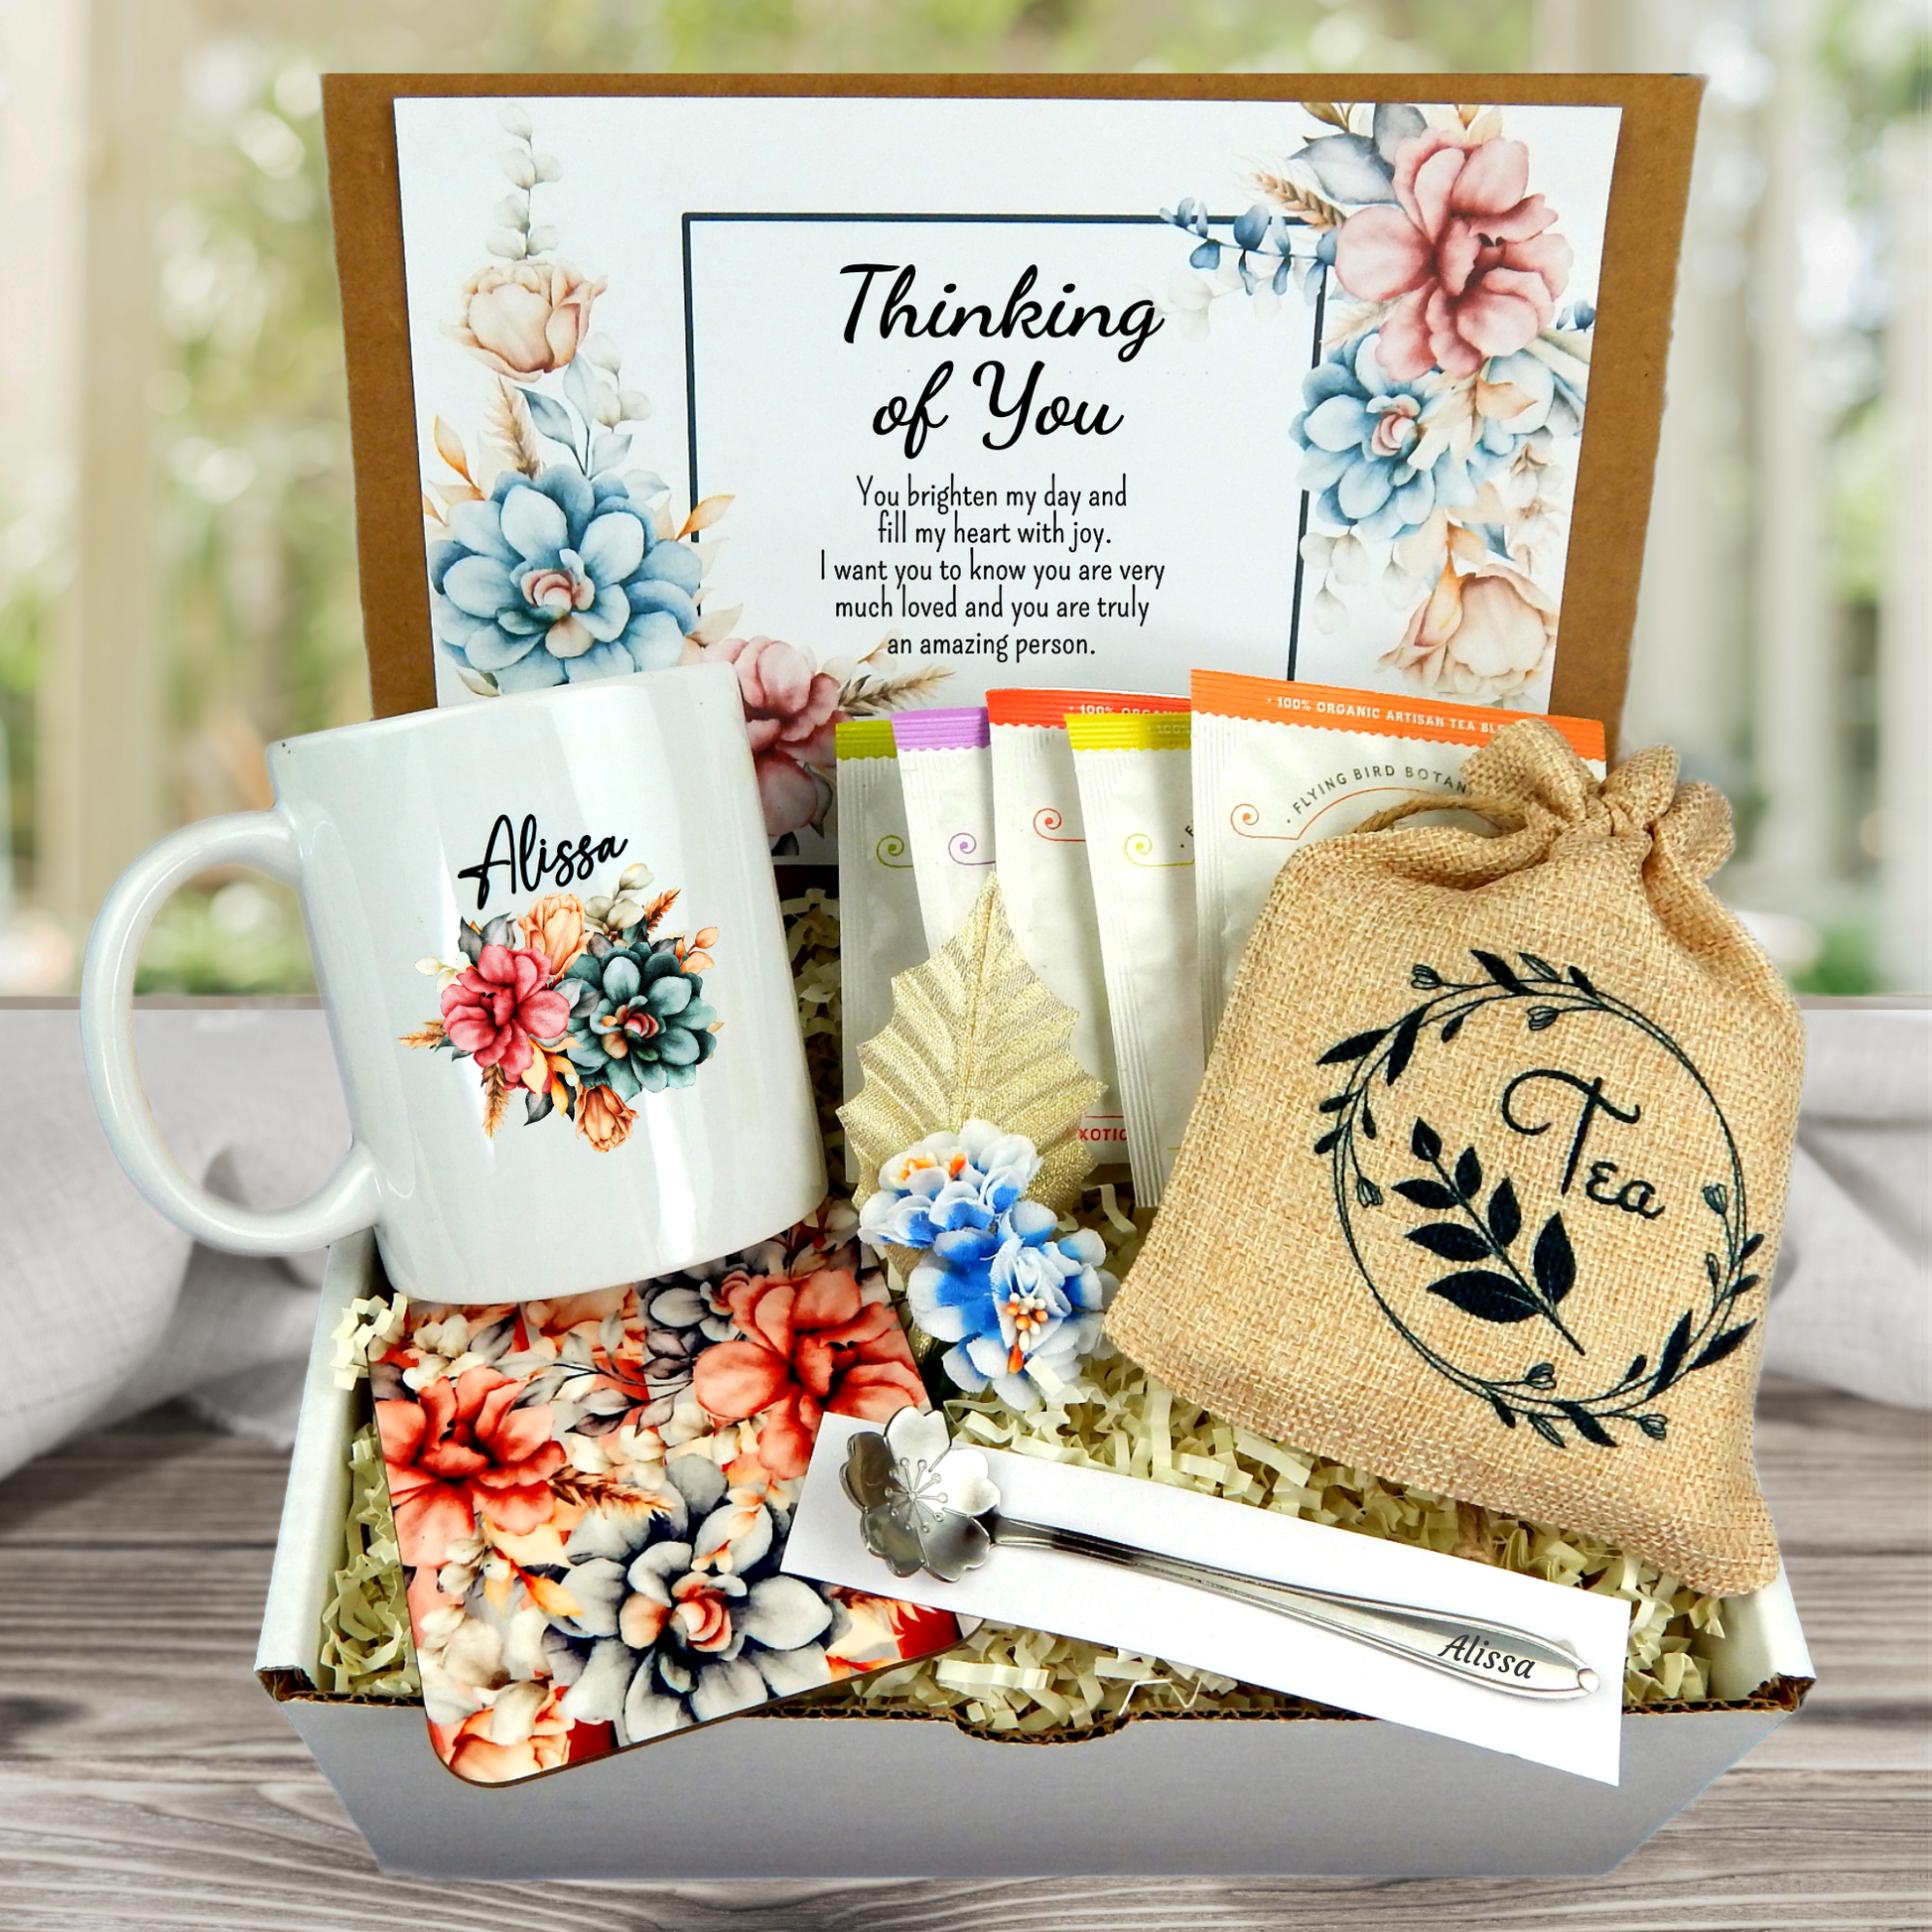 thinking of you care package with Customized mug, tea sampler, coaster, personalized card with floral motif